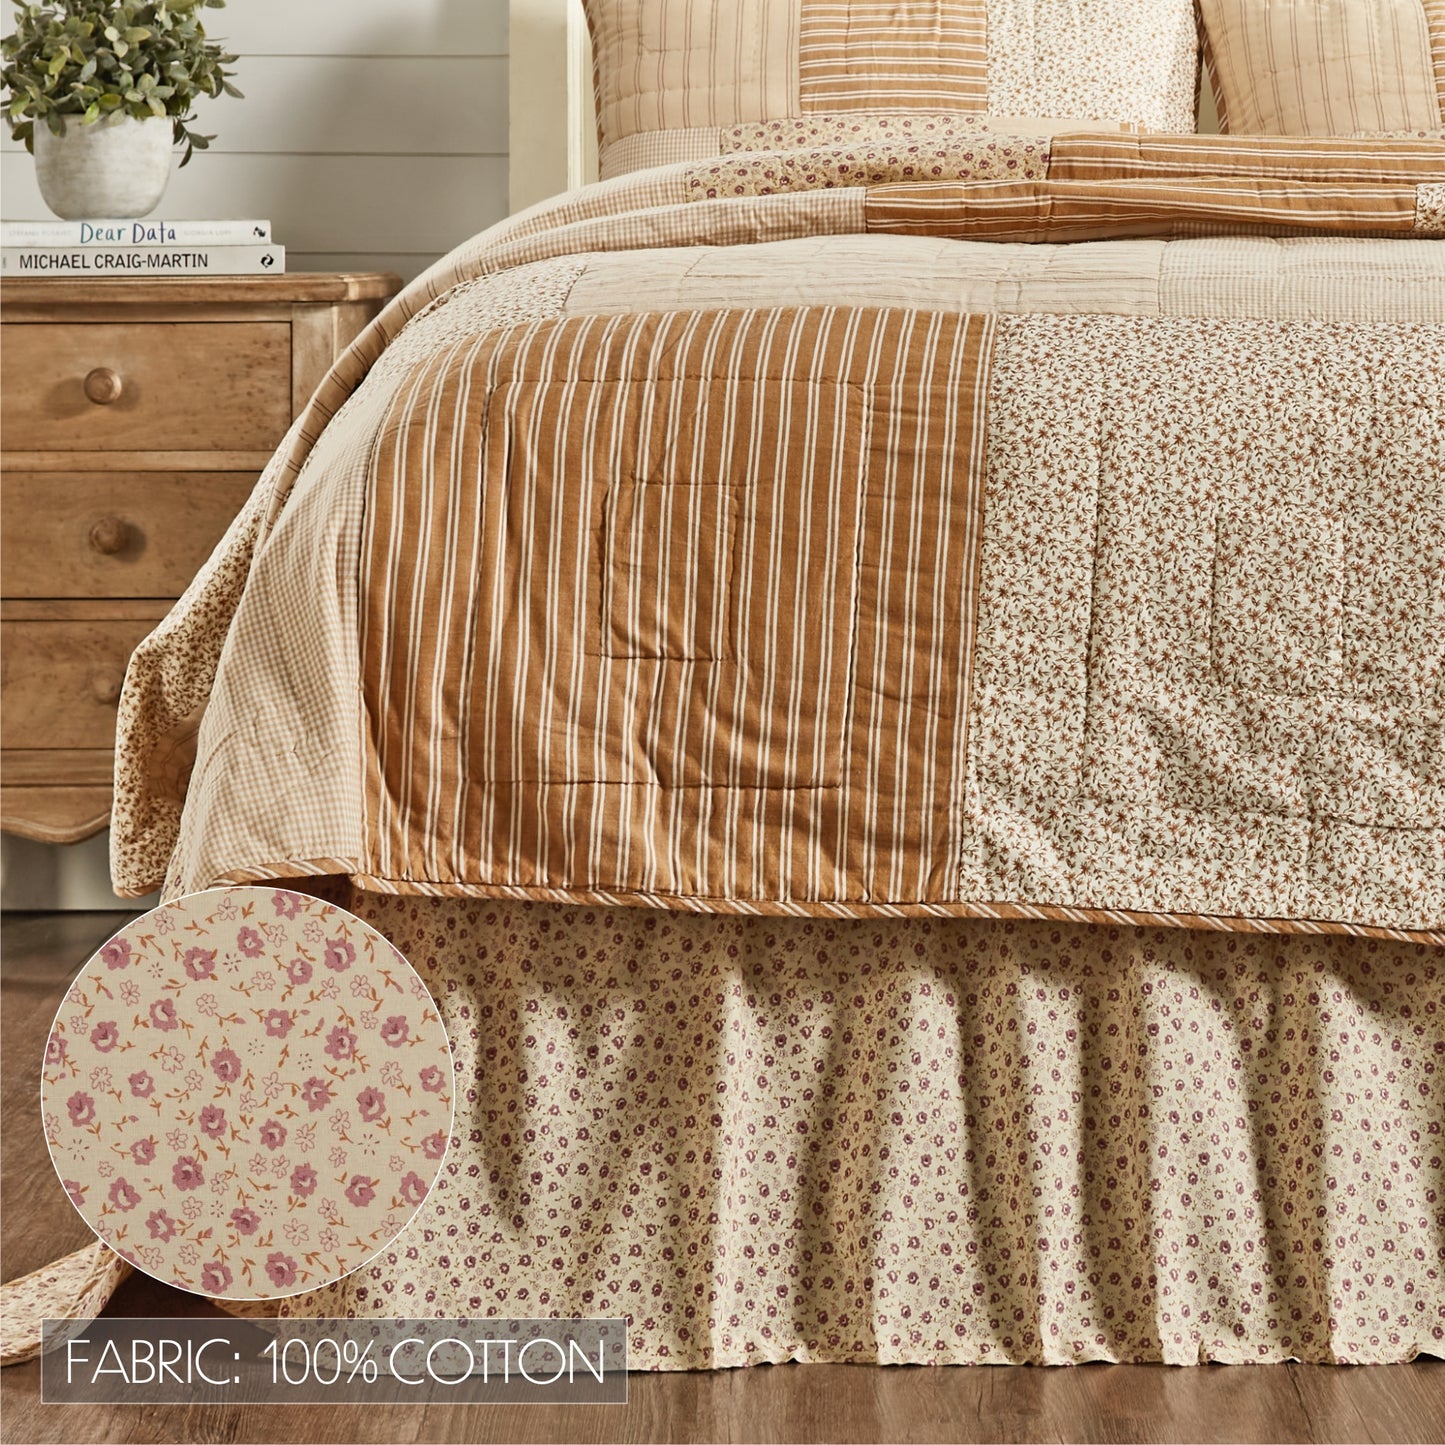 70077-Camilia-Queen-Bed-Skirt-60x80x16-image-4